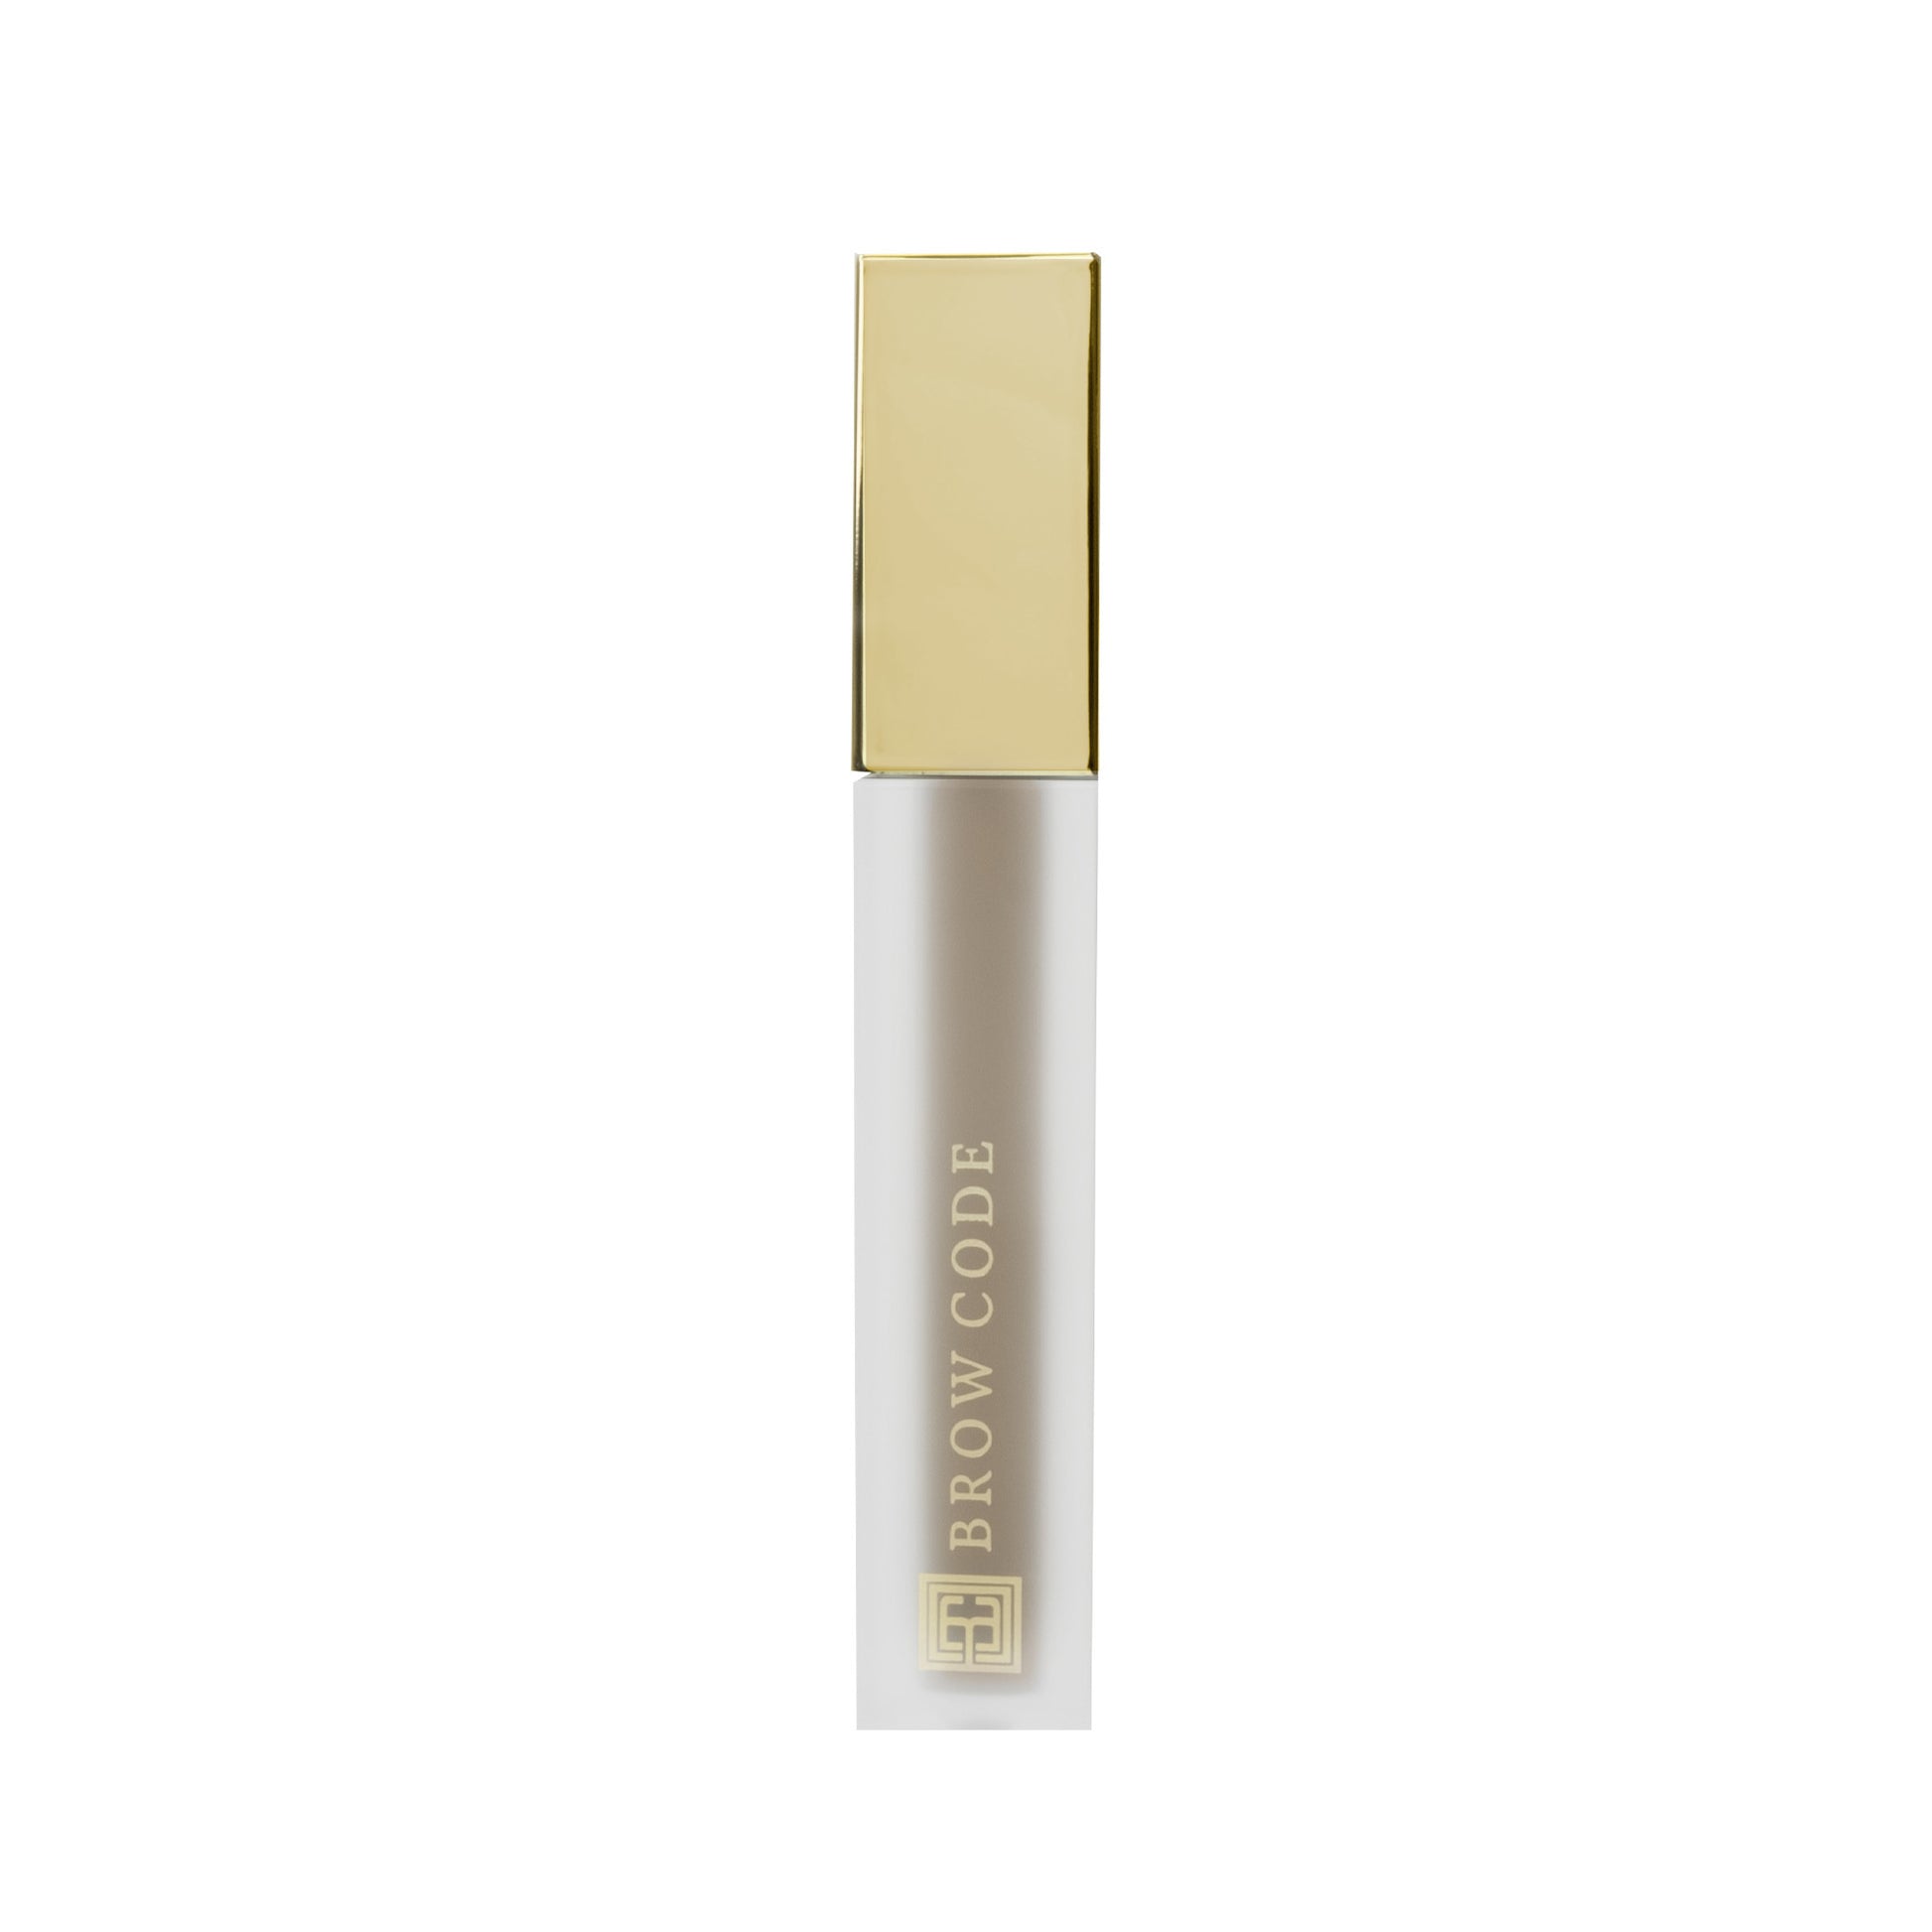 Tinted Multi-Peptide Brow Gel - Color-Taupe - product against a white background